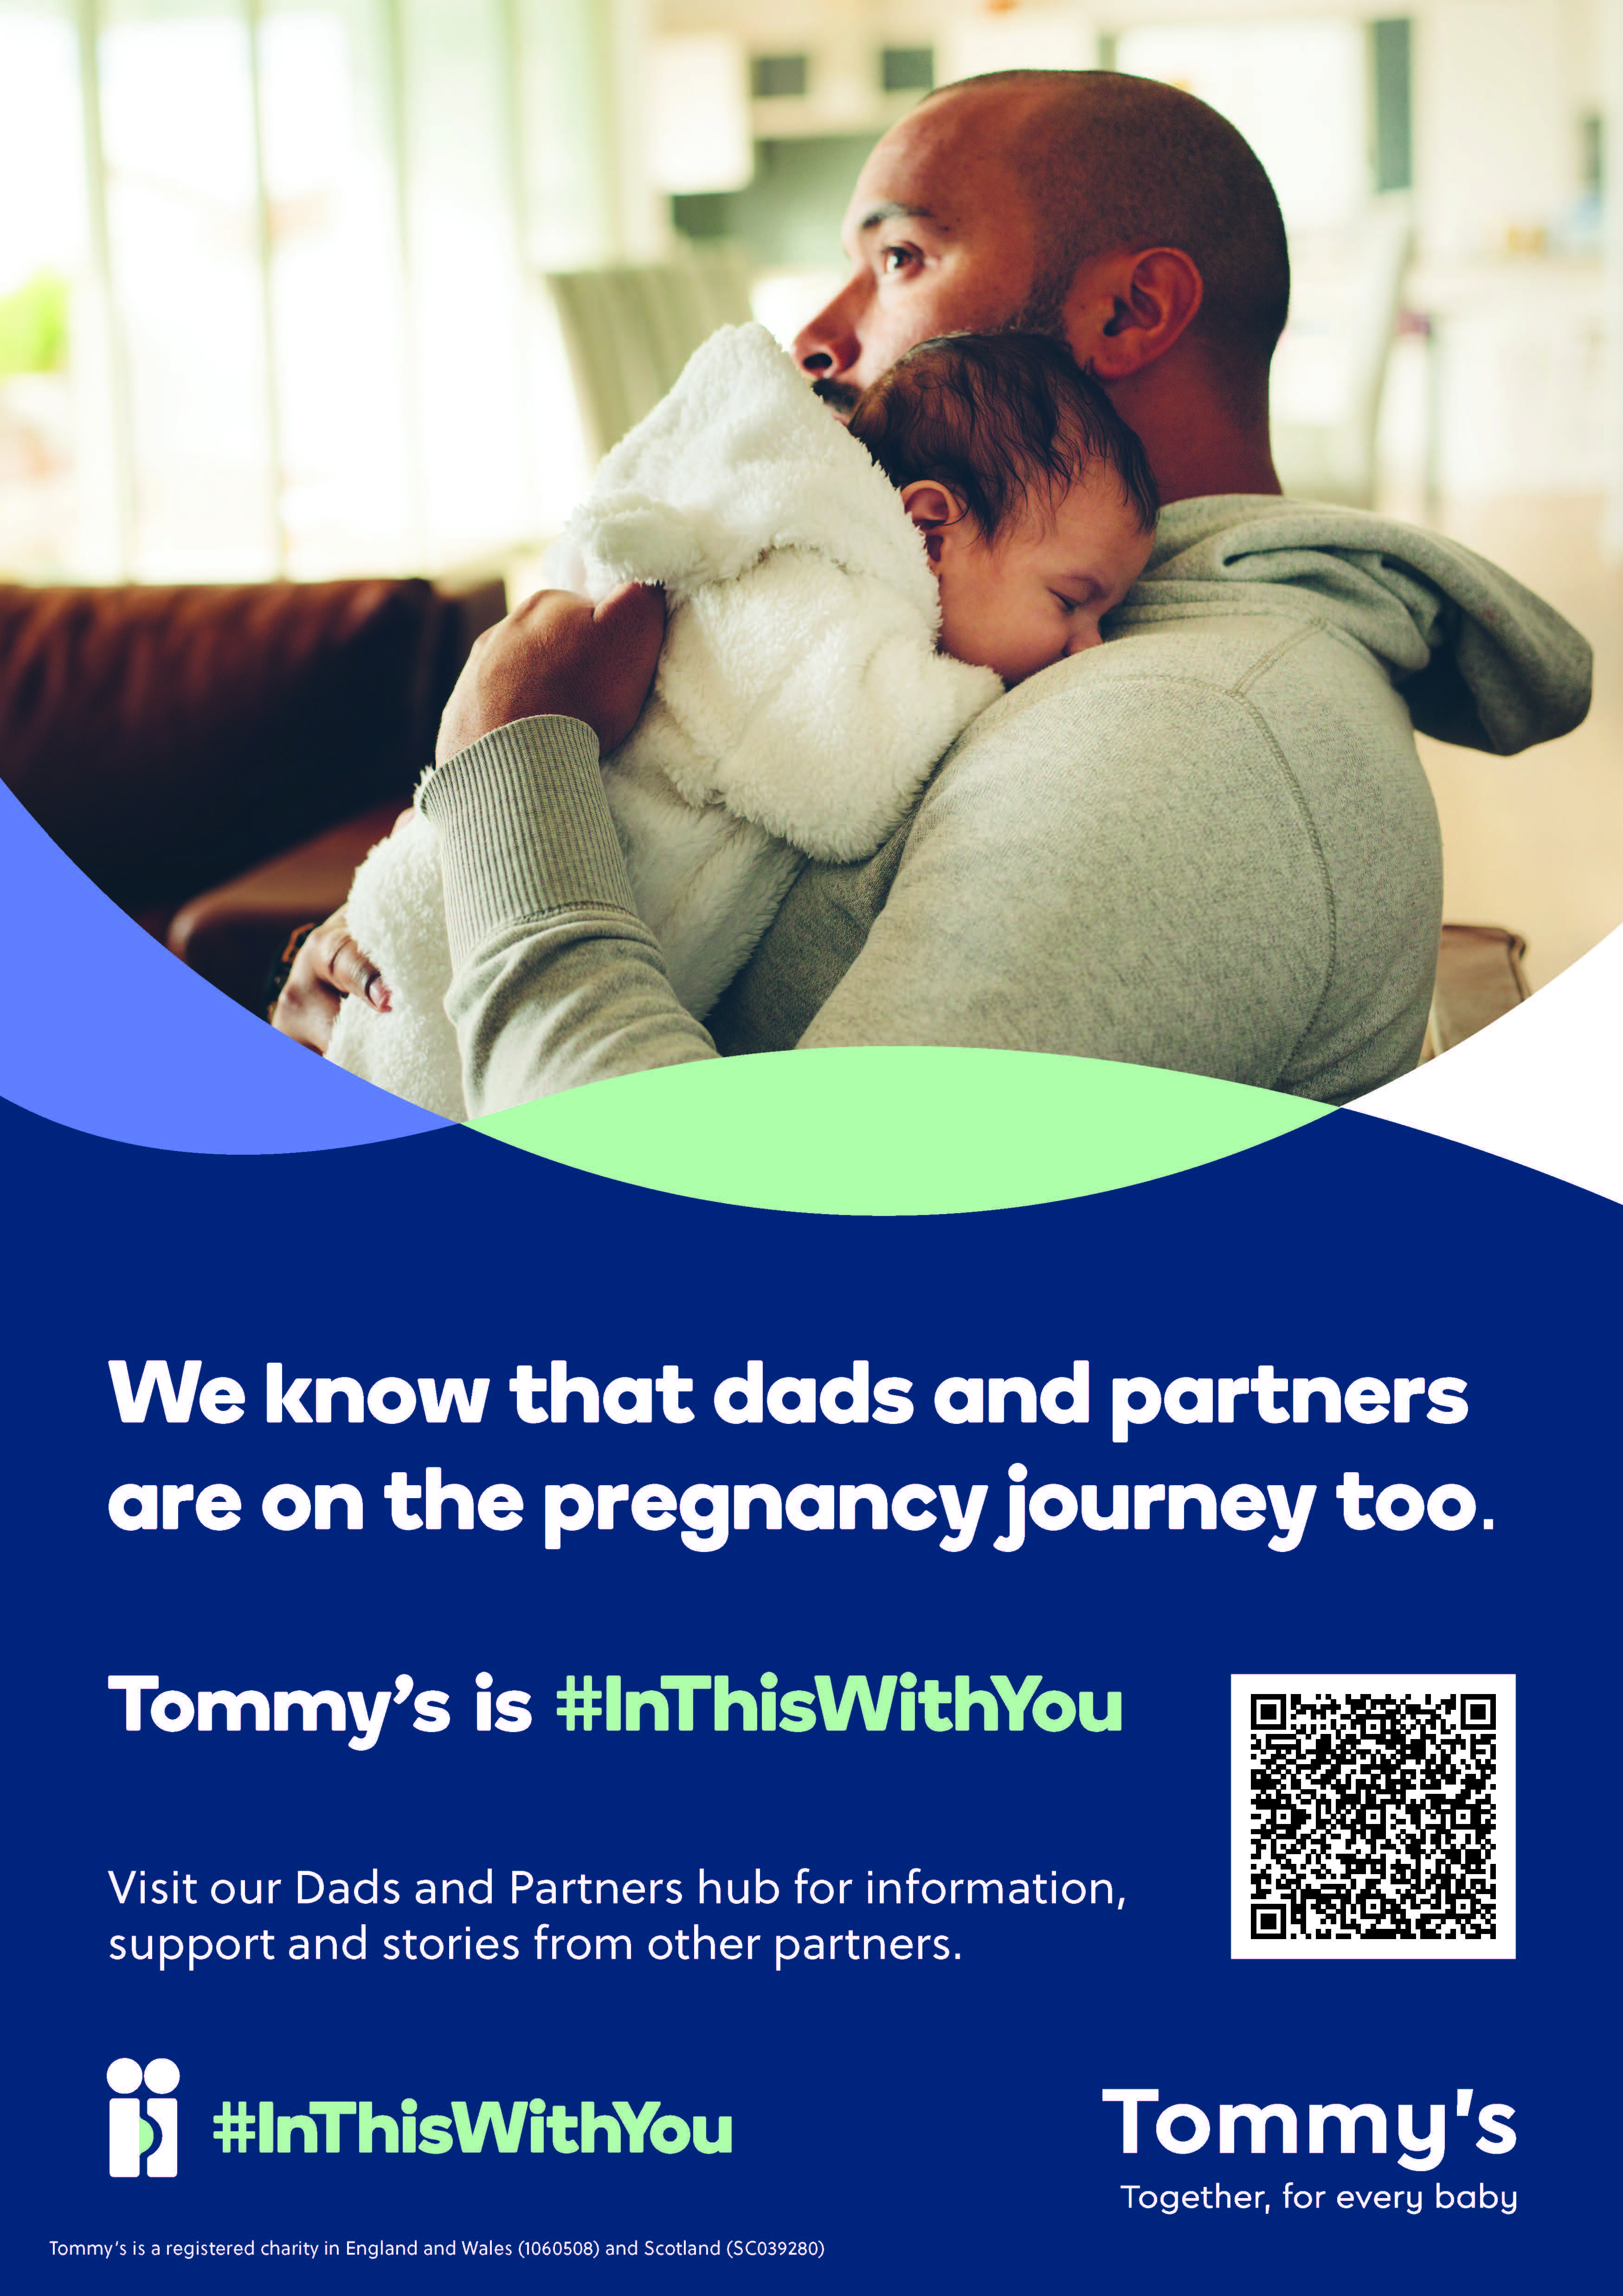 Image of a dad holding a new baby. The copy reads, we know that dads and partners are on the pregnancy journey too. Tommy’s is #InThisWithYou Visit our Dads and Partners hub for information, support and stories from other partners. 